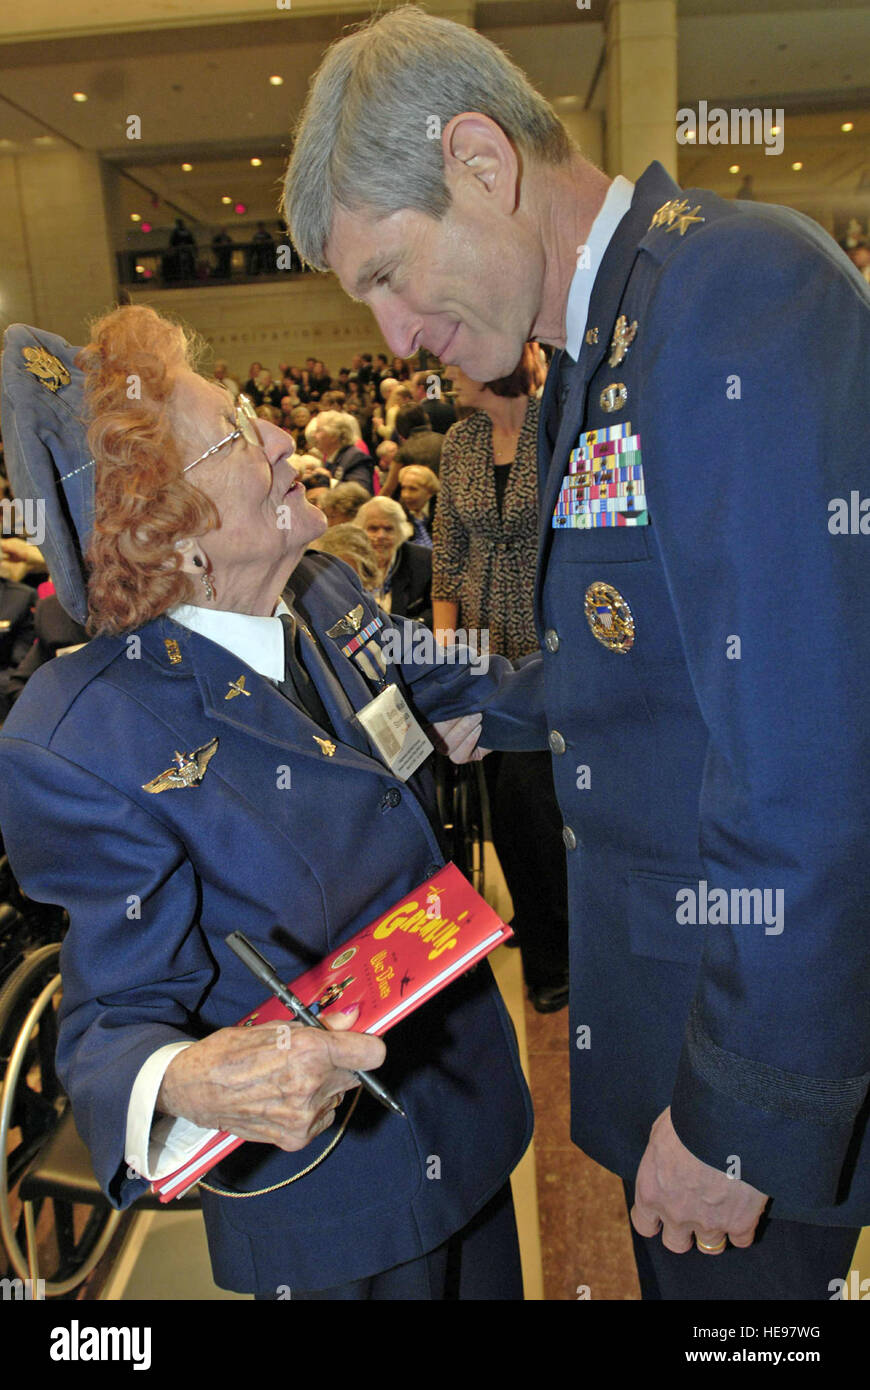 Betty Wall Strohfus, a Women Airforce Service Pilot from Minnesota, talks with Air Force Chief of Staff Gen. Norton Schwartz at the Congressional Gold Medal ceremony at the Capitol March 10, 2010. More than 200 WASPs attended the event, many of them wearing their World War II-era uniforms. The audience, which Speaker Nancy Pelosi noted was one of the largest ever in the Capitol and too large to fit into Emancipation Hall, also included their families, as well as the families of those who have since died or couldn't travel. Staff Sgt. J.G. Buzanowski) Stock Photo